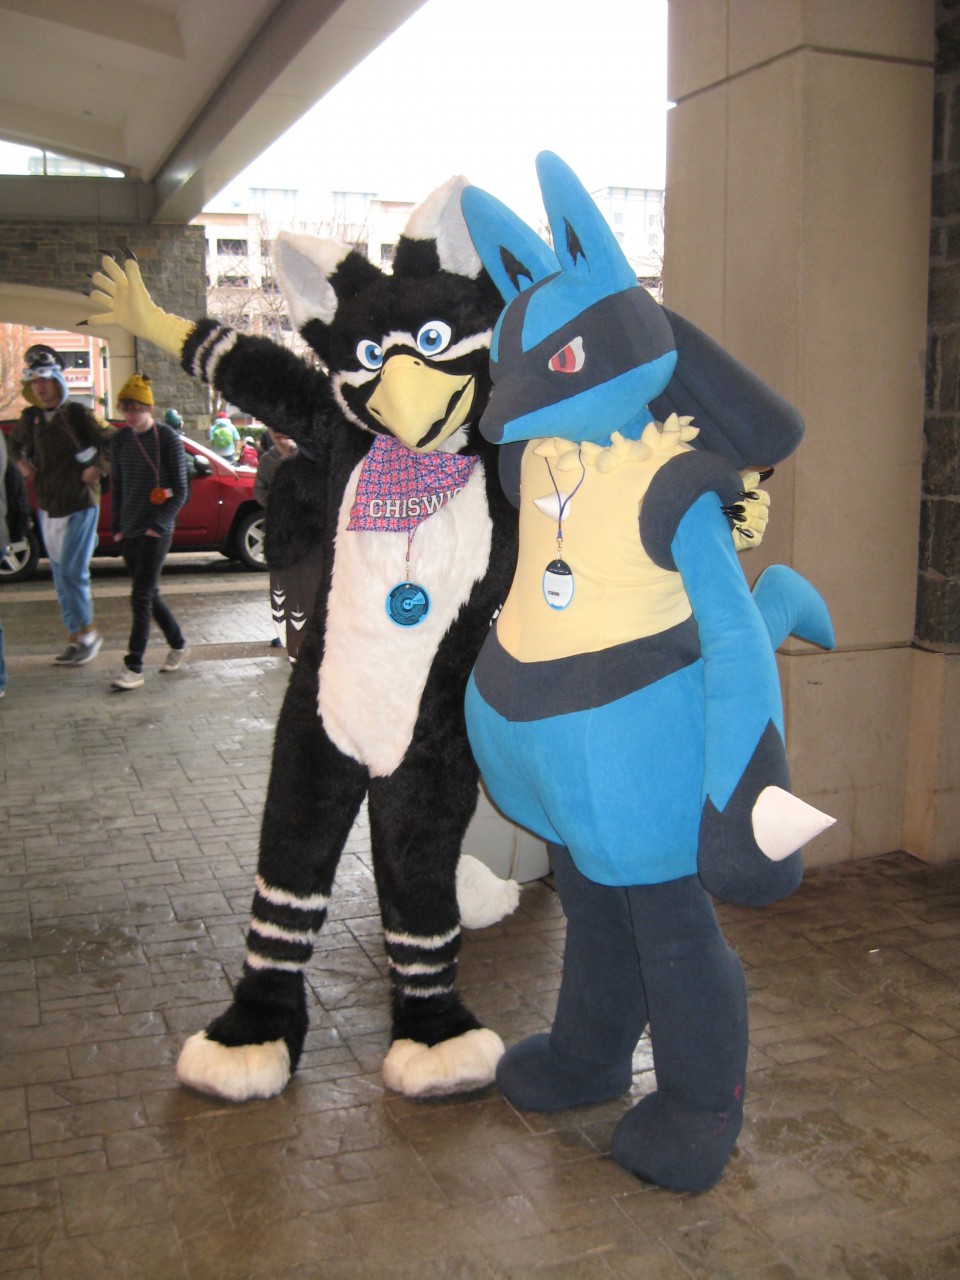 MAGFest 2015 - Chiswick and Lucario